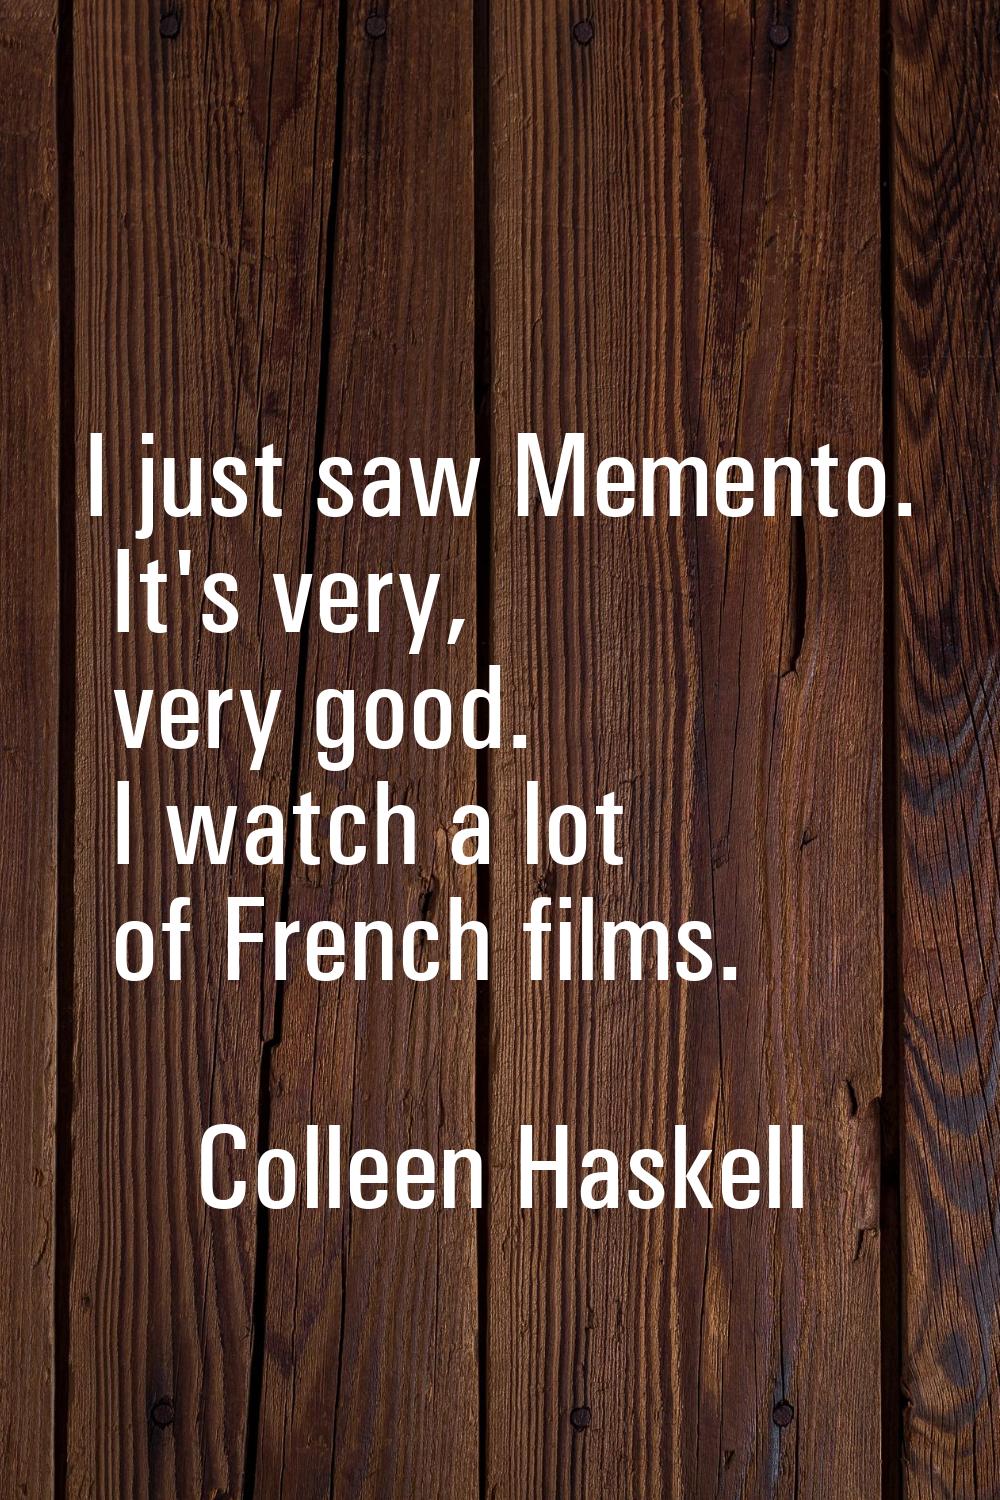 I just saw Memento. It's very, very good. I watch a lot of French films.